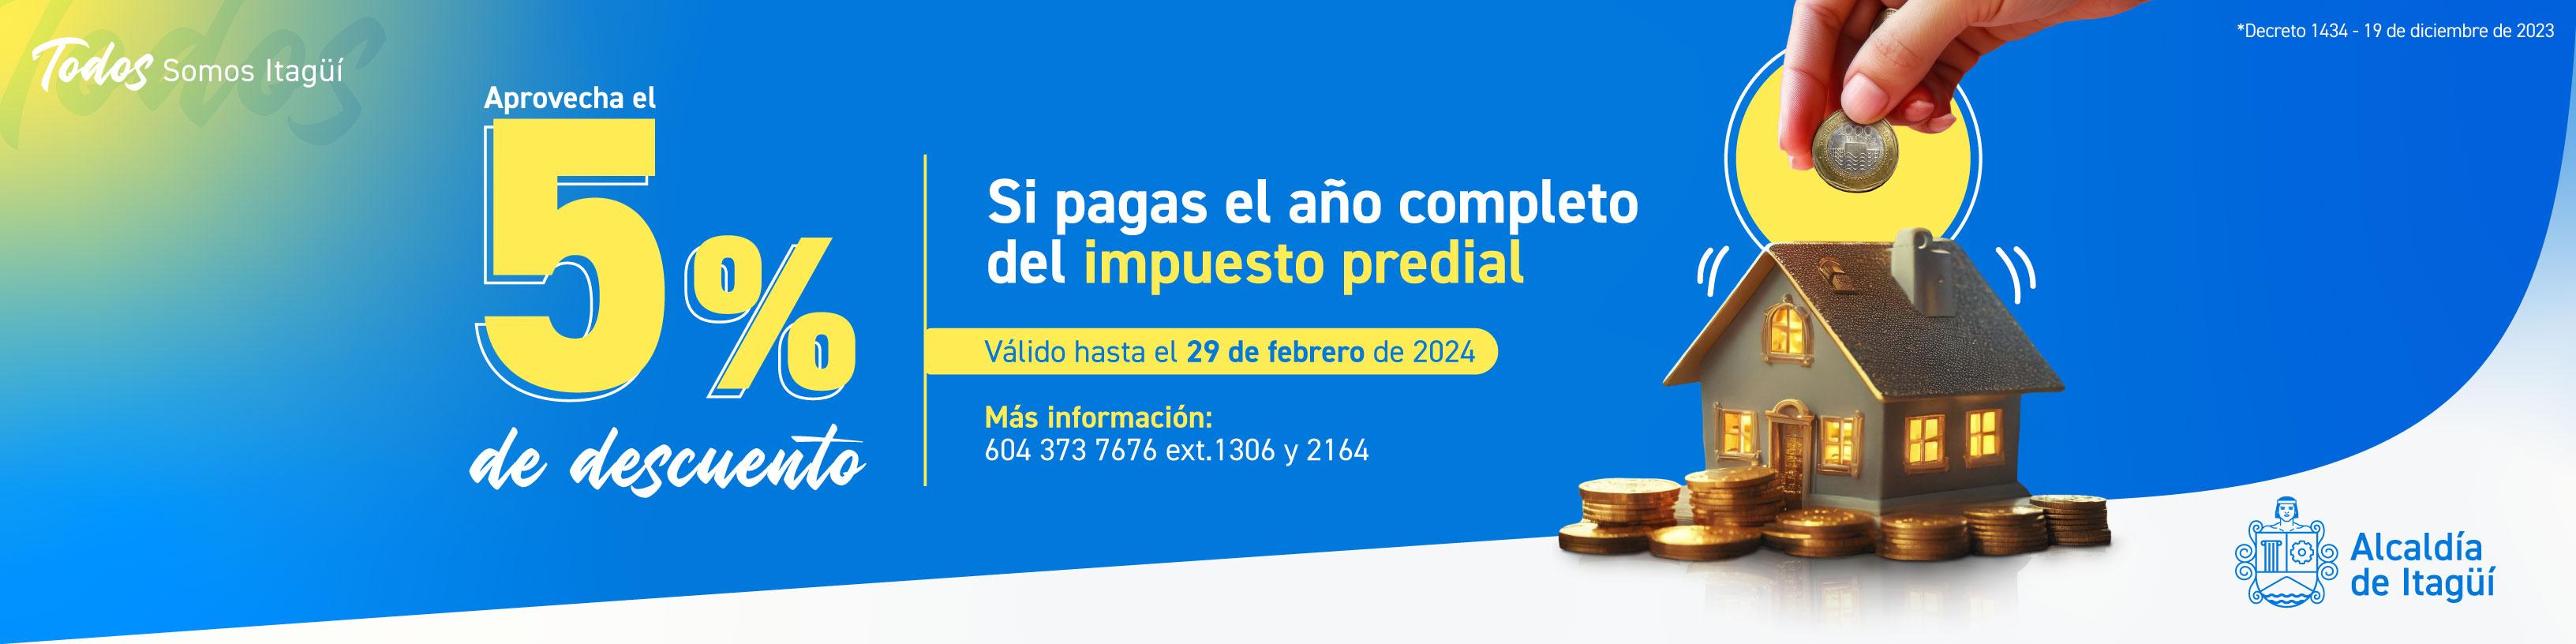 It is an image that refers to the savings that people can have when paying the annual property tax in Itagüí. It is a 5% discount that they will receive and you see an image of a house and a coin that allude to savings.